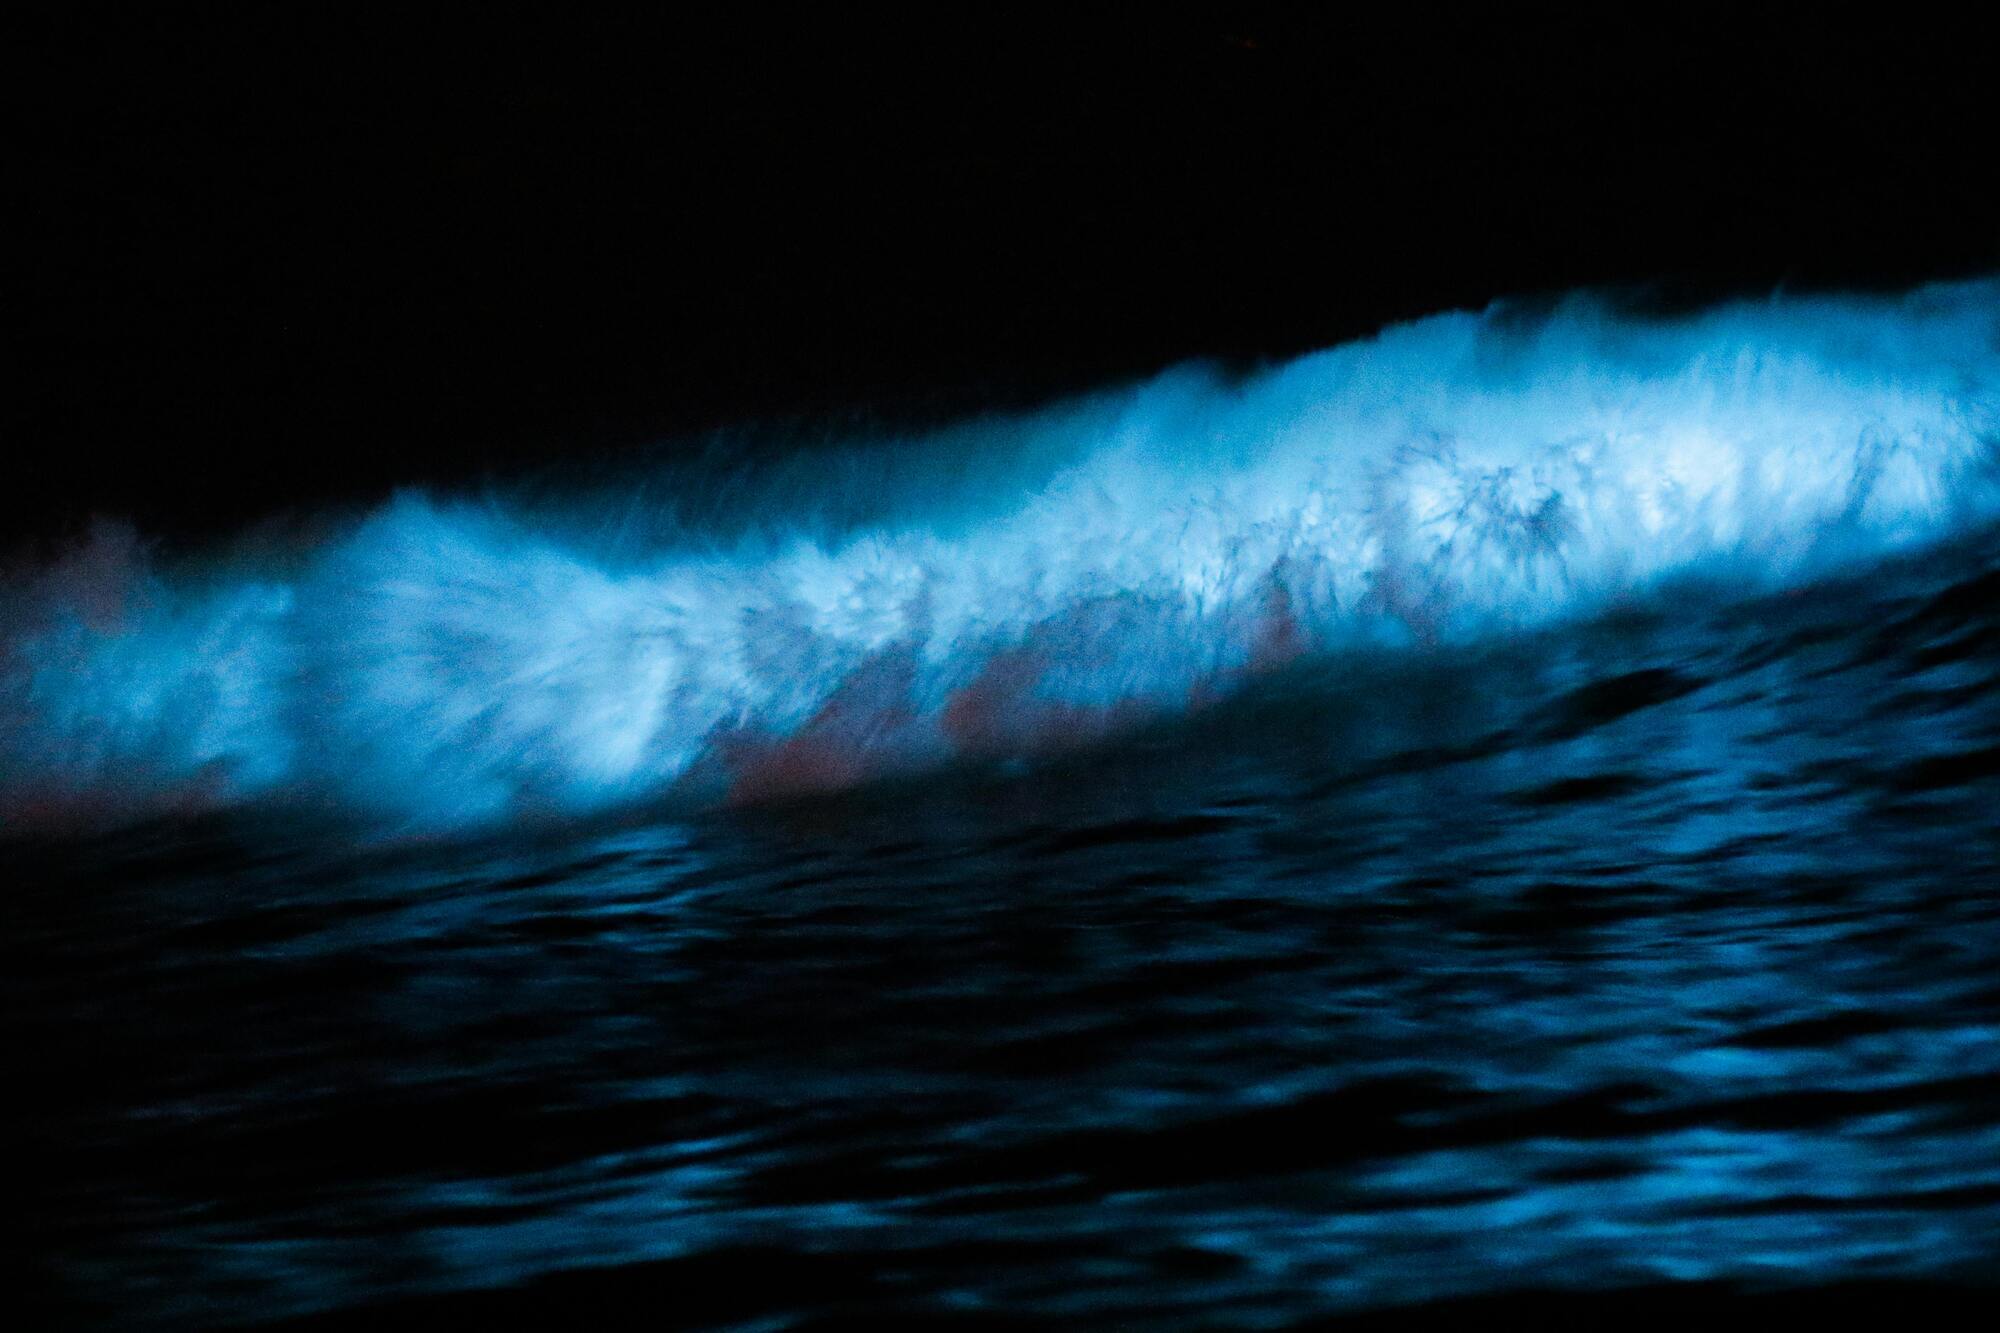 Exquisite bioluminescent beaches of the world to visit